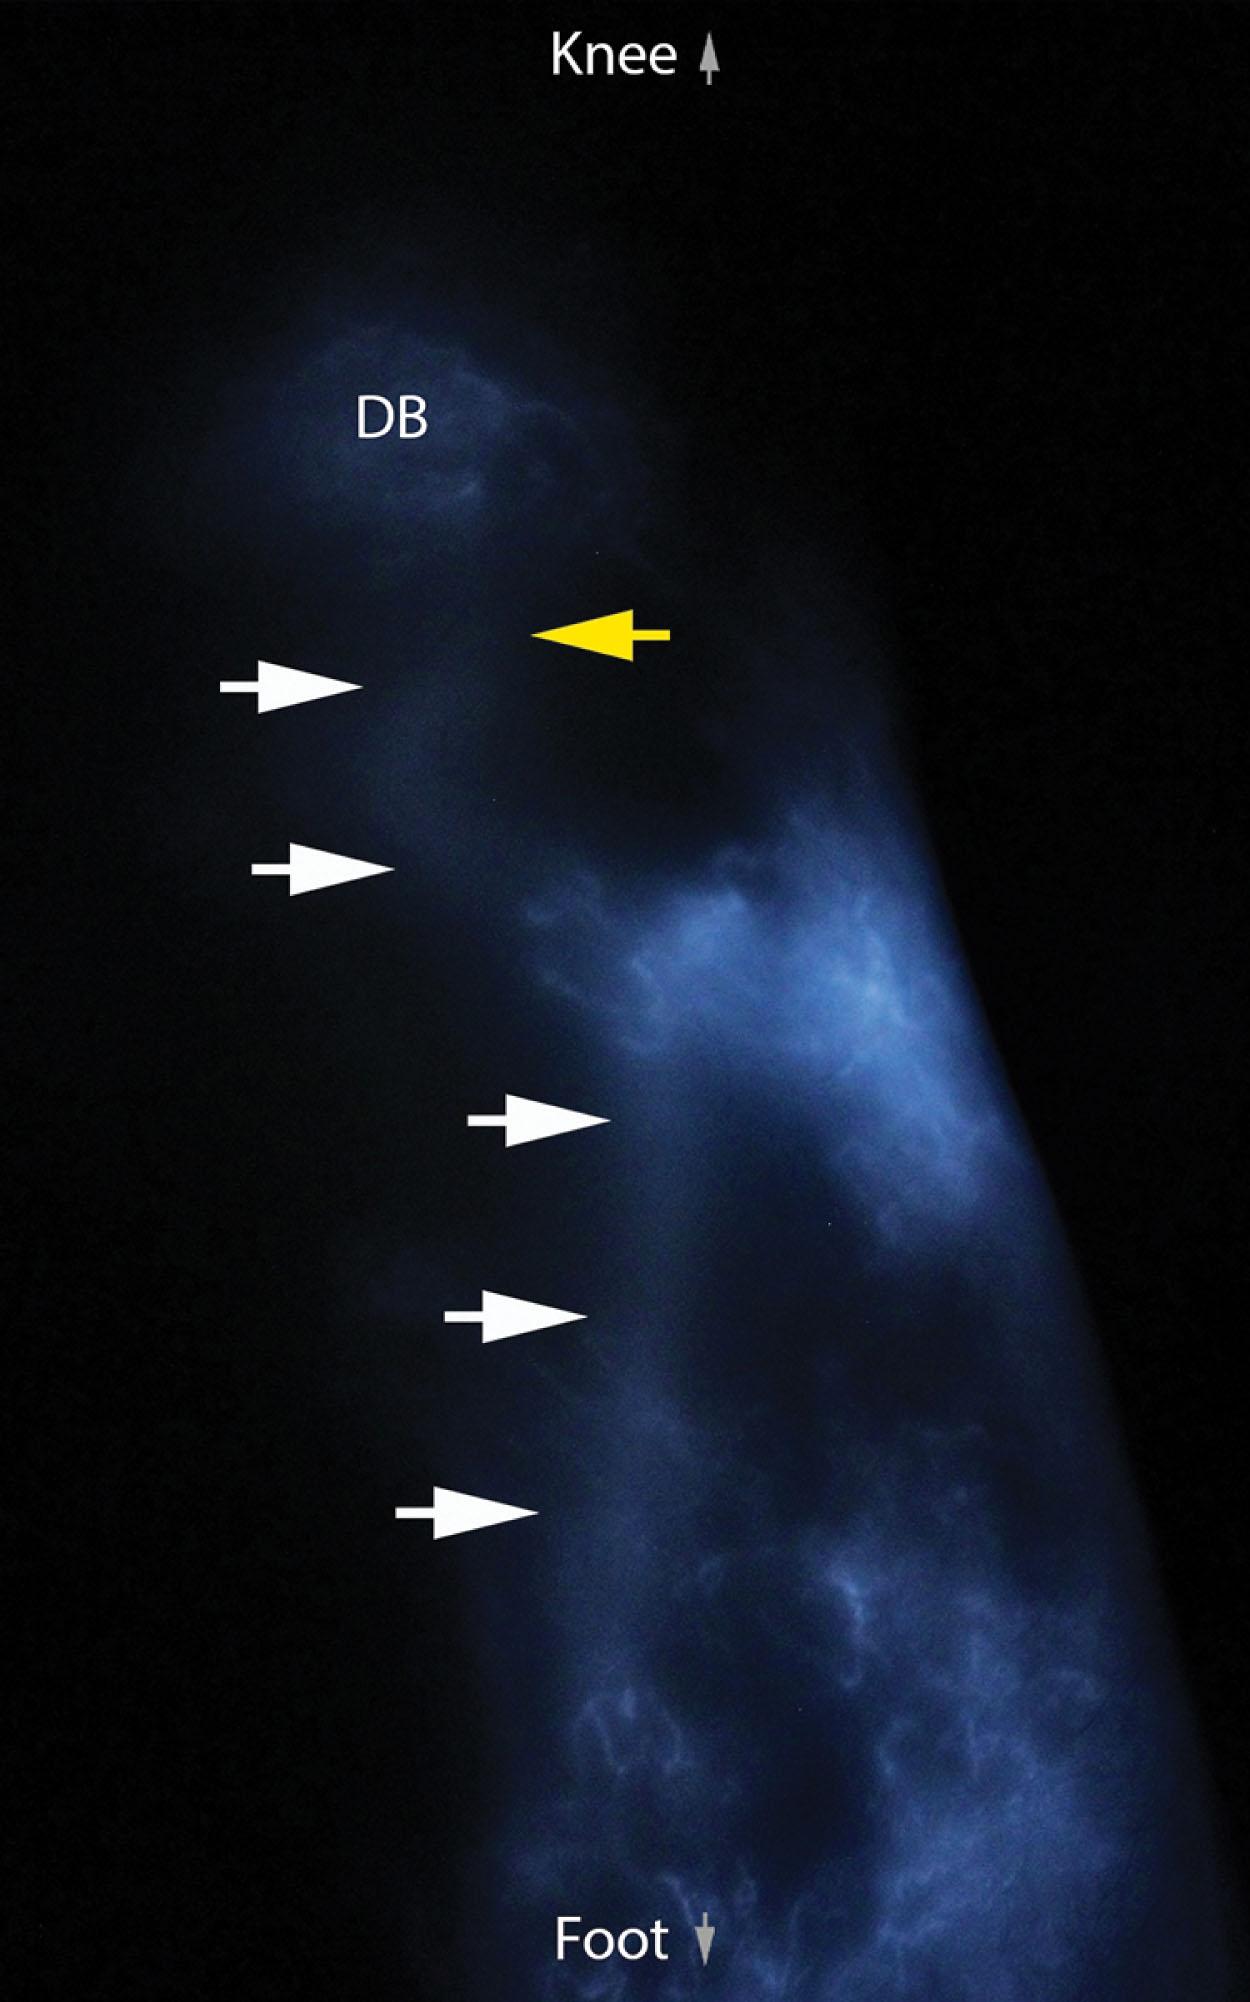 Figure 3.2.7, IGC lymphography indicates the optimal spot for LVA reconstruction (yellow arrow) in the pretibial region, where the linear pattern (white arrows) ends up in a dermal backflow pattern (DB).